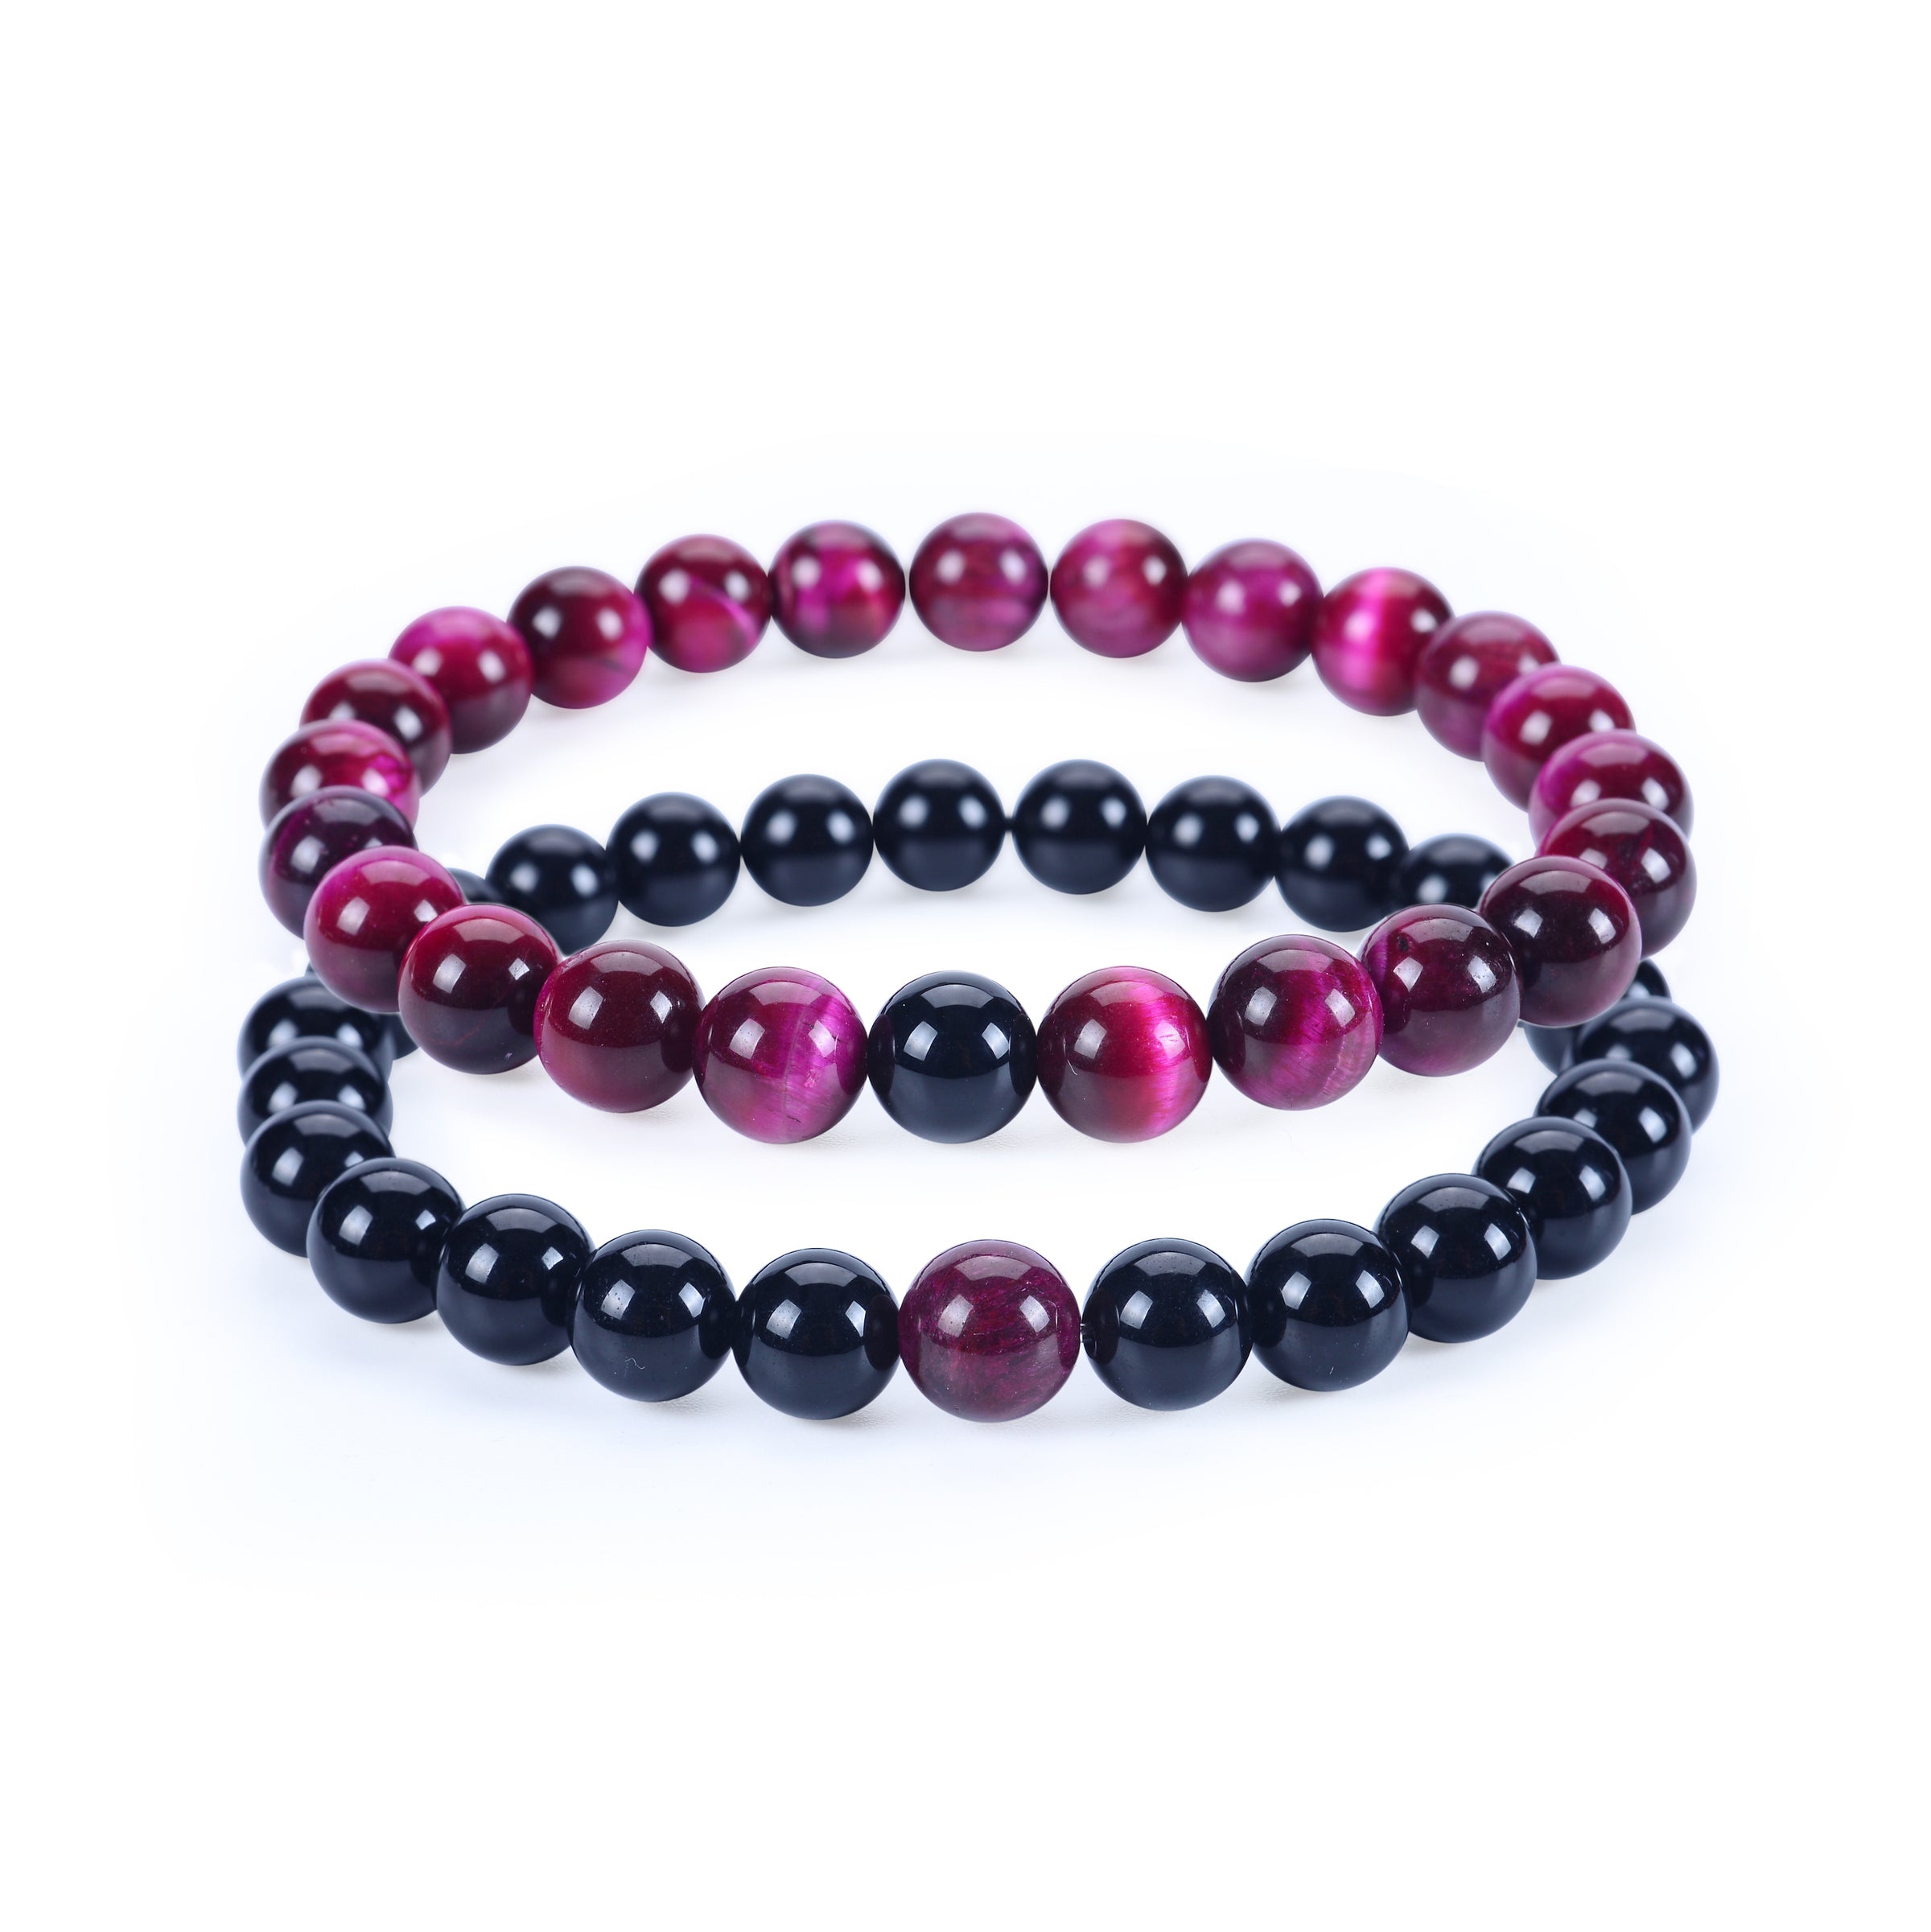 Couples Distance Stretch Bracelets | 8mm Beads (Black Agate and Pink Tiger's Eye)